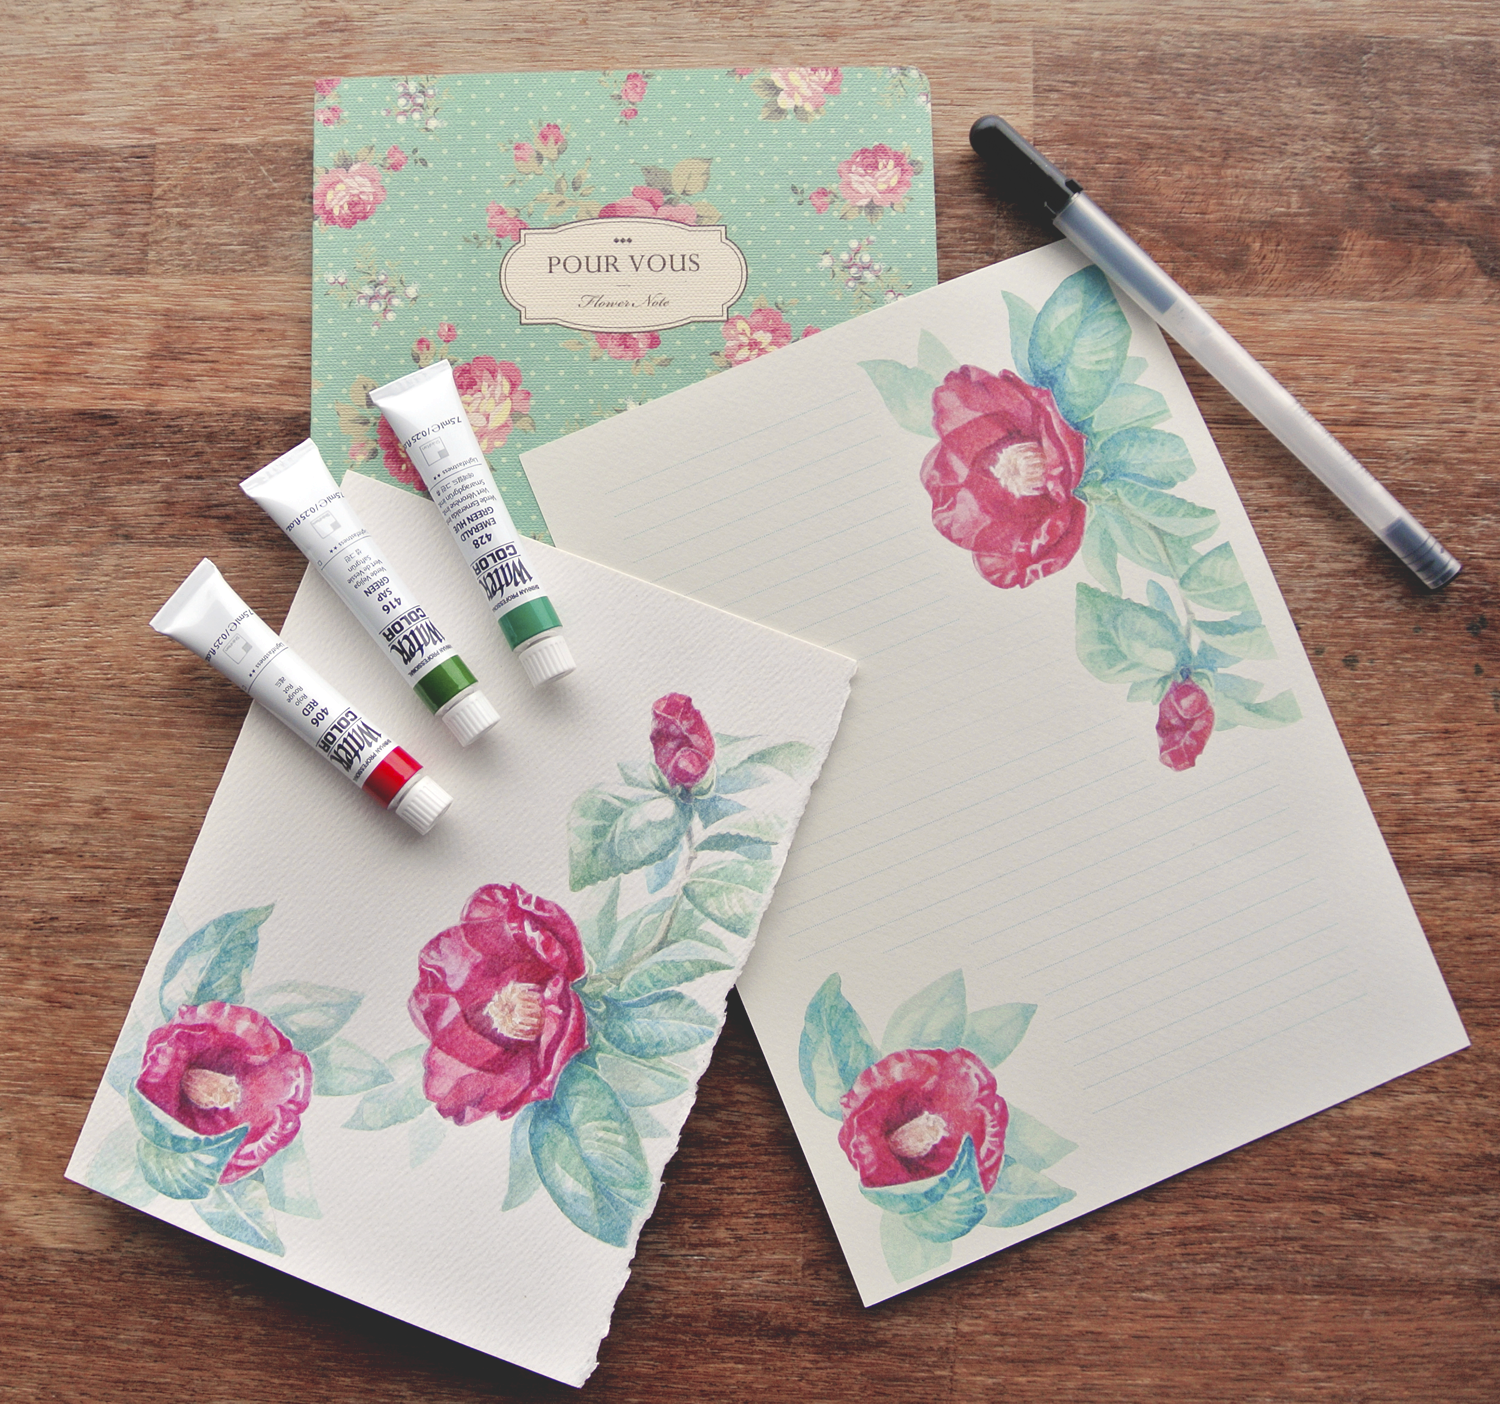 Writing Weekly Letters  Making My Own Letter Paper Printables